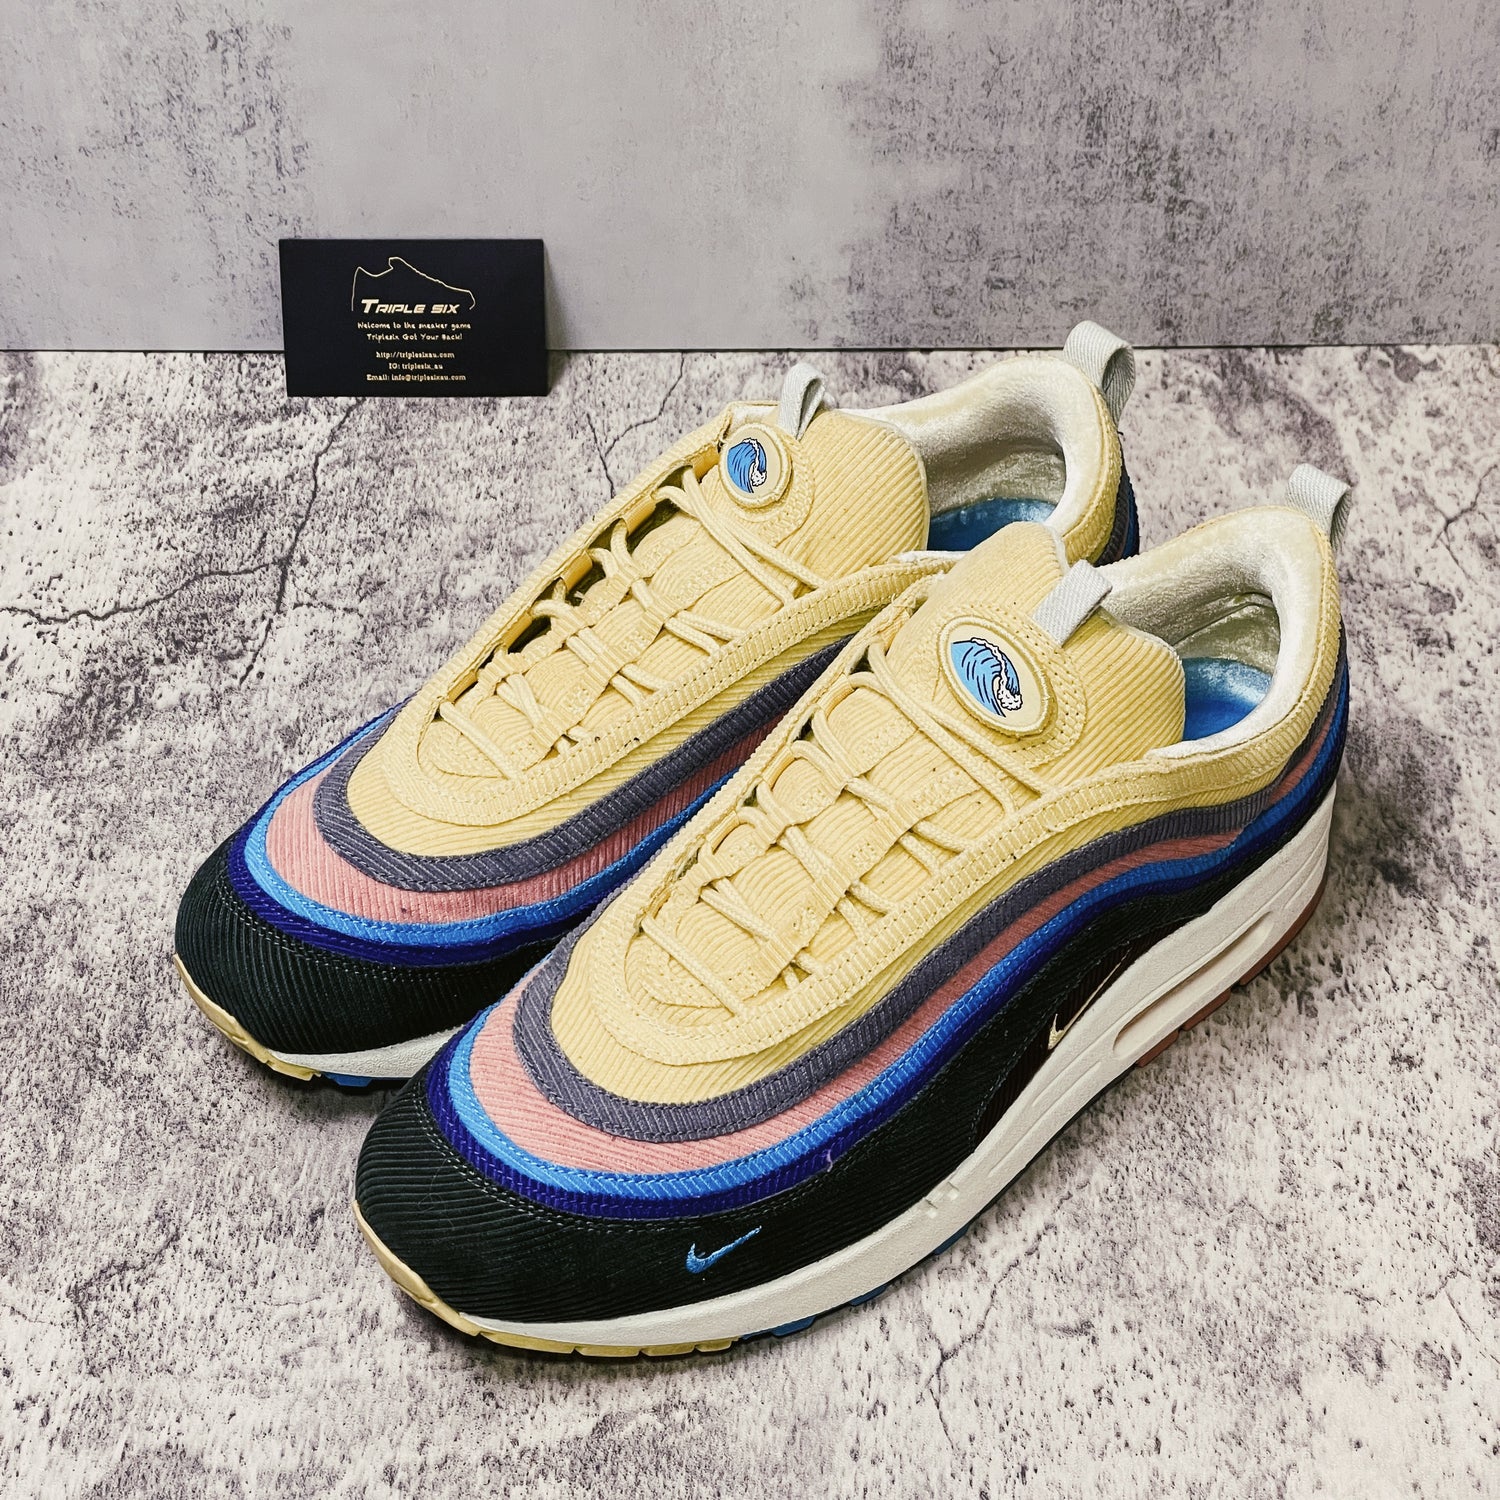 Nike Air Max 1/97 Sean Wotherspoon Size Triplesix Sneakers